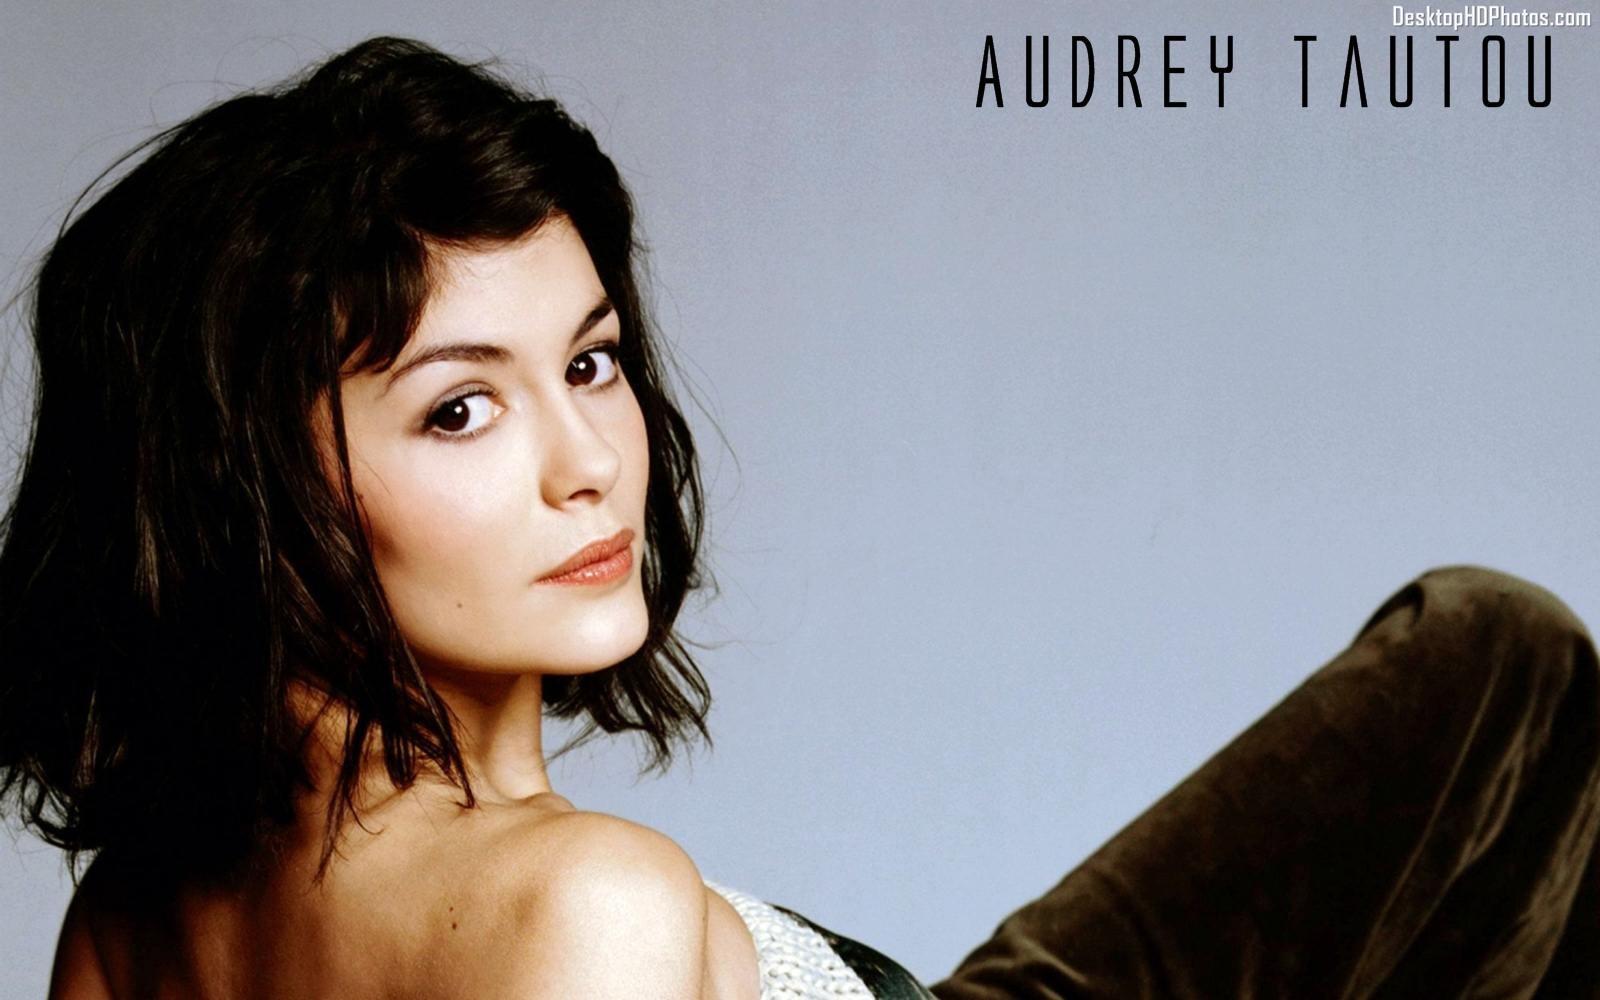 Audrey Tautou 2015 HD Wallpaper, Background Image